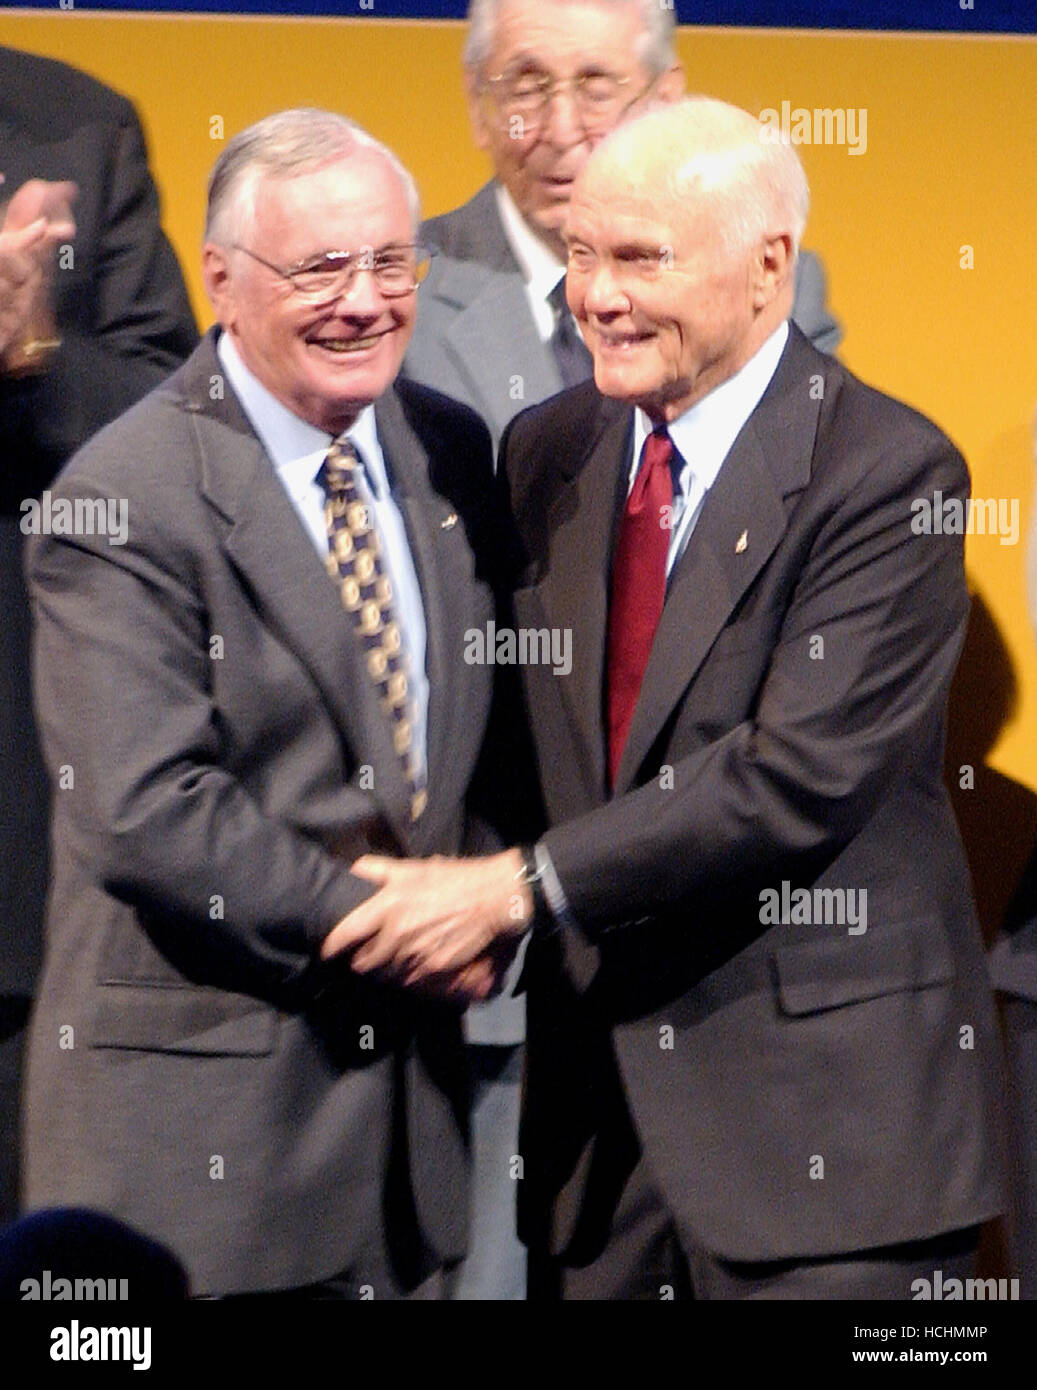 Chantilly, VA - December 11, 2003 -- Space pioneers Neil A. Armstrong and John H. Glenn share an embrace as they are introduced during the dedication of the National Air and Space Museum's Steven F. Udvar-Hazy Center in Chantilly, Virginia on December 11, Stock Photo